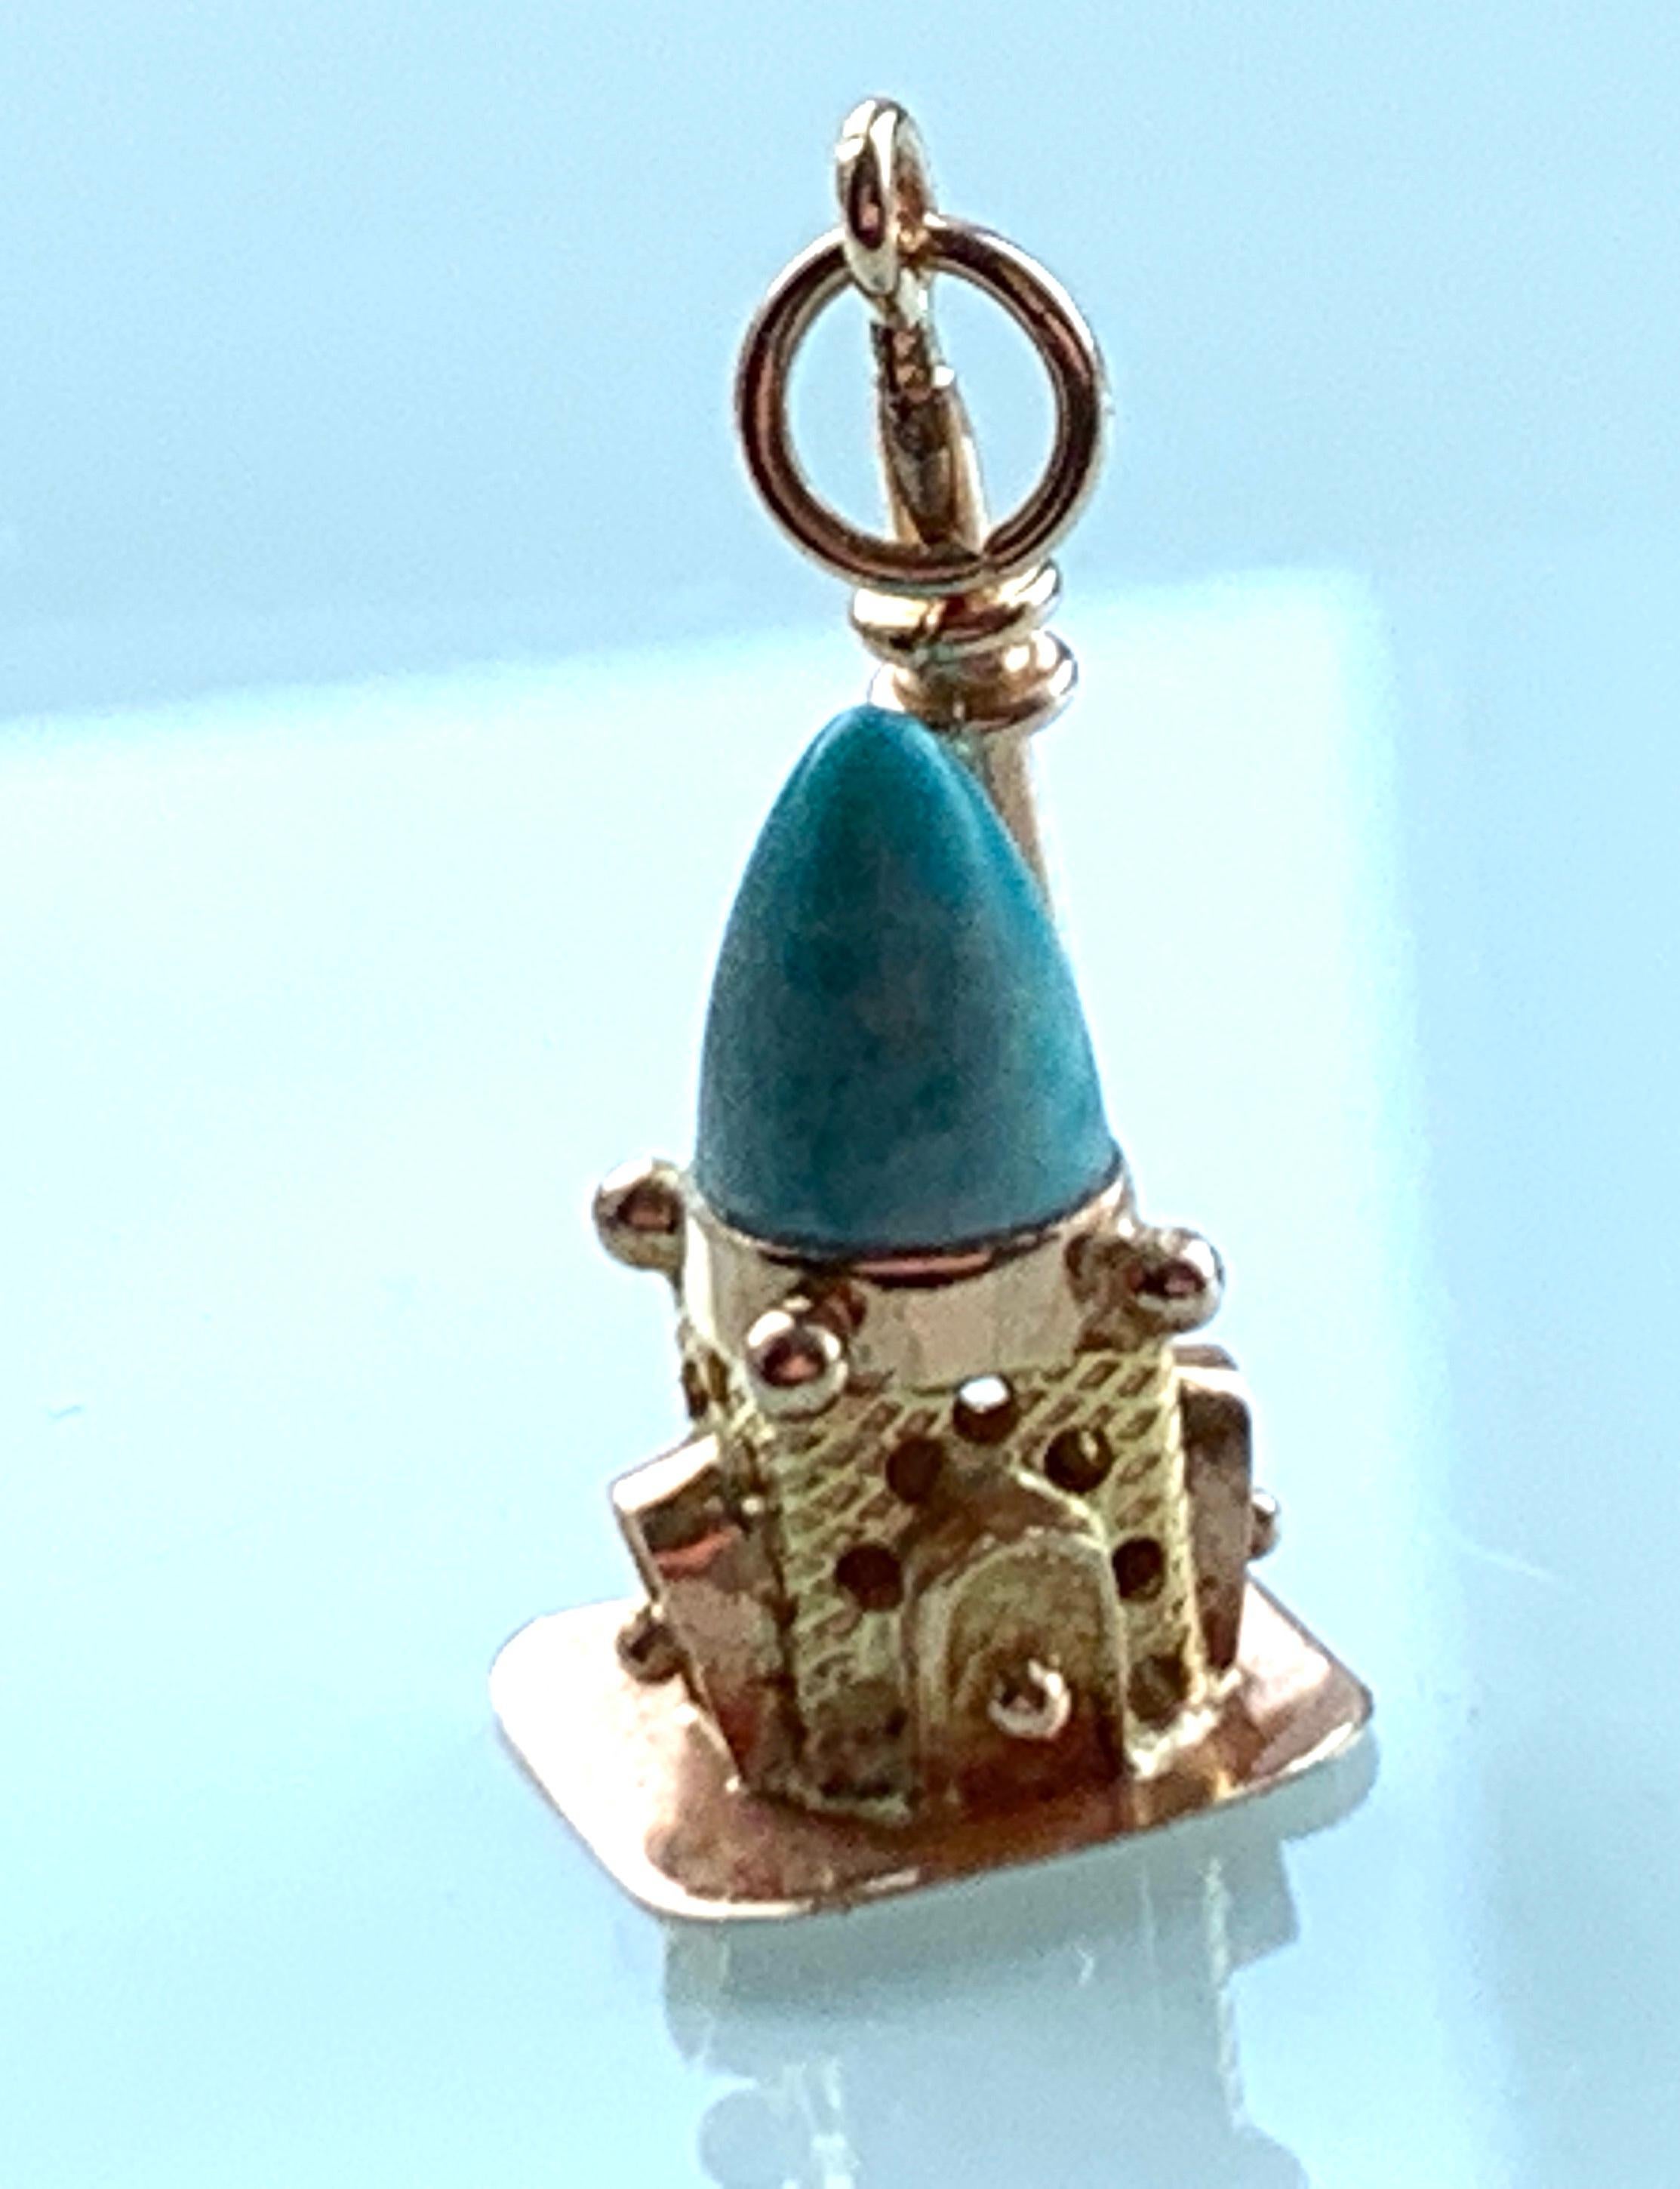 14ct 585 Gold Vintage CHARM
non precious turquoise stone completes the temple
Stamped on Base 585 with seriel numbers

